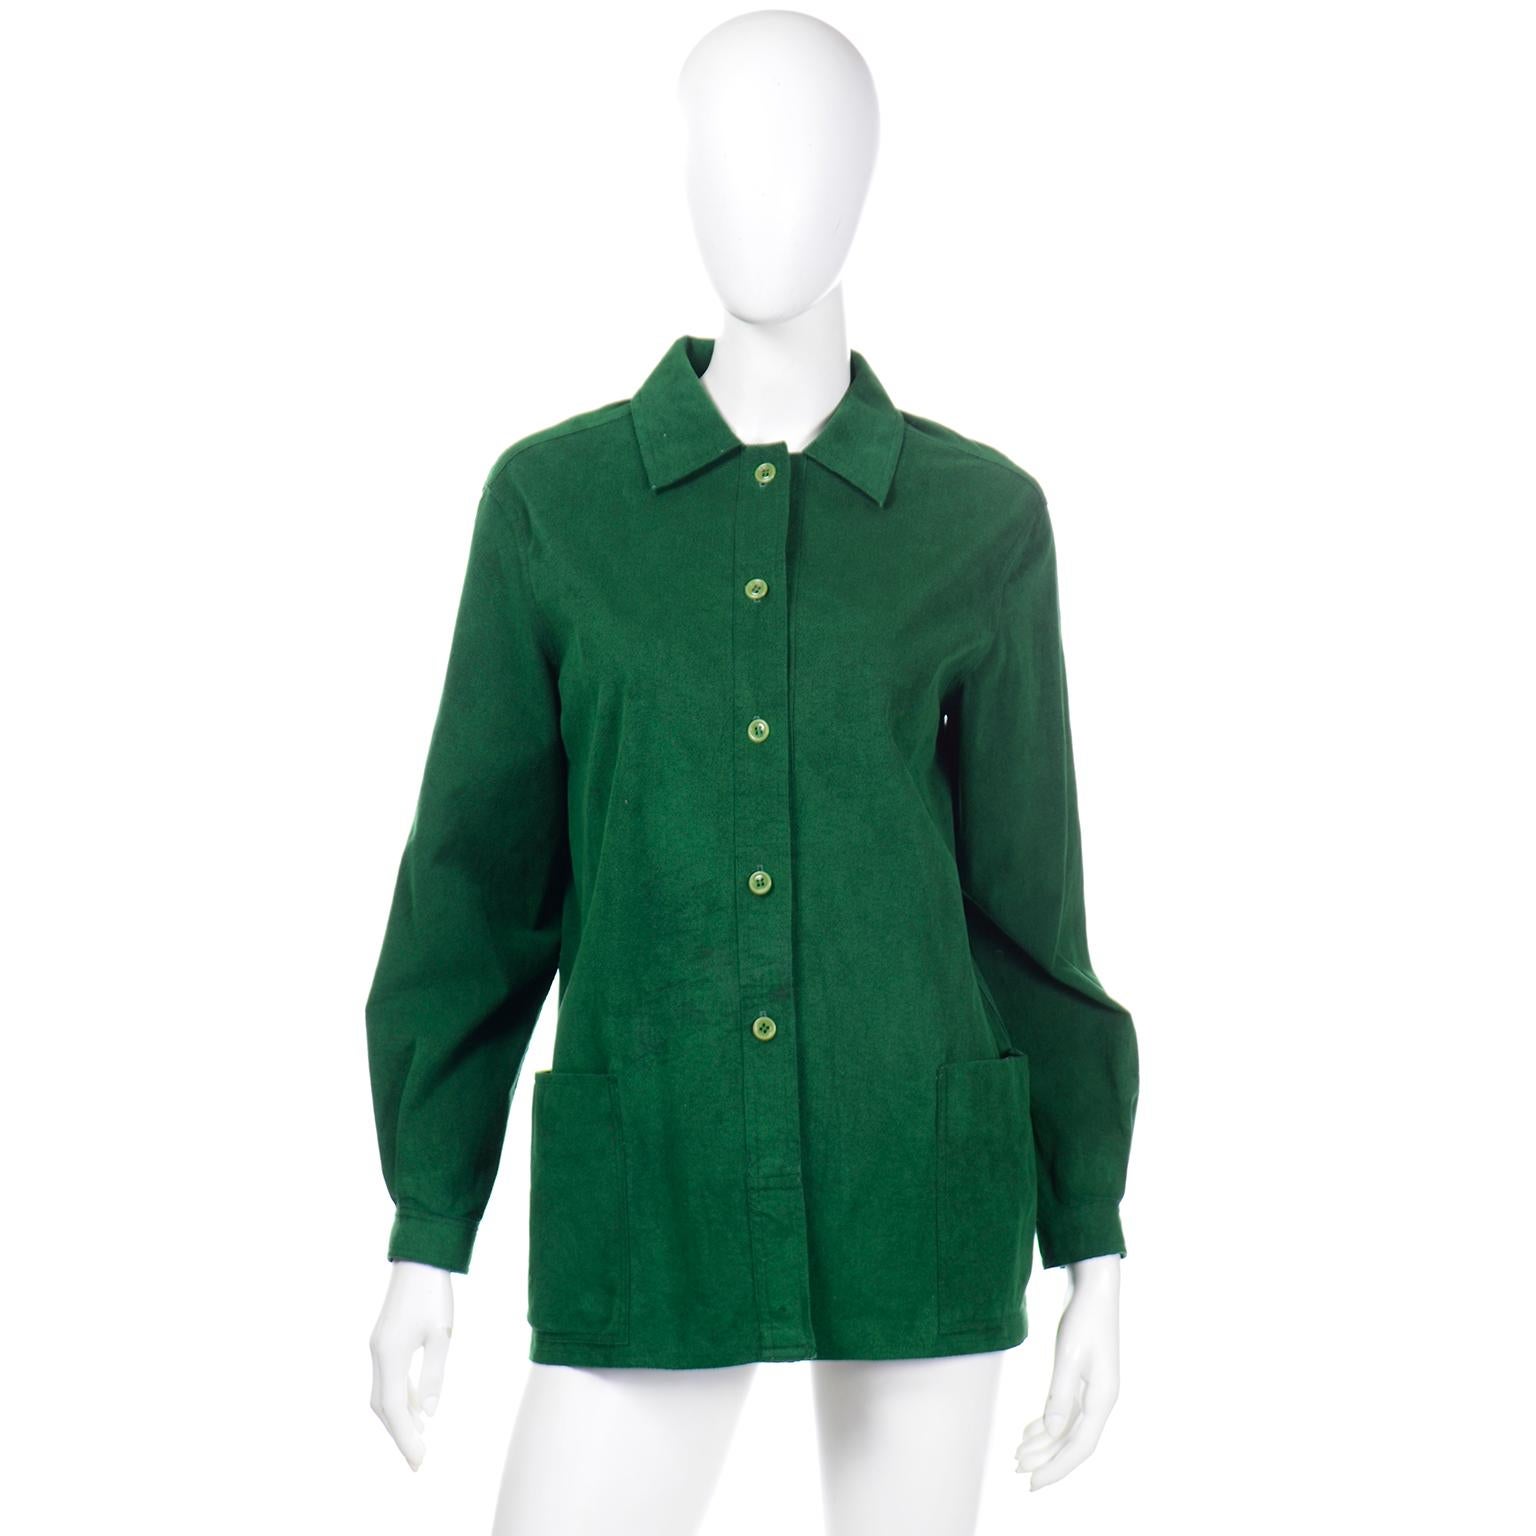 This Halston 1970's rich deep grass green ultrasuede shirt is styled like a chore jacket with deep front patch pockets. You can wear this as a light jacket with a tee shirt underneath or as a top. Halston is the one of the first designers to